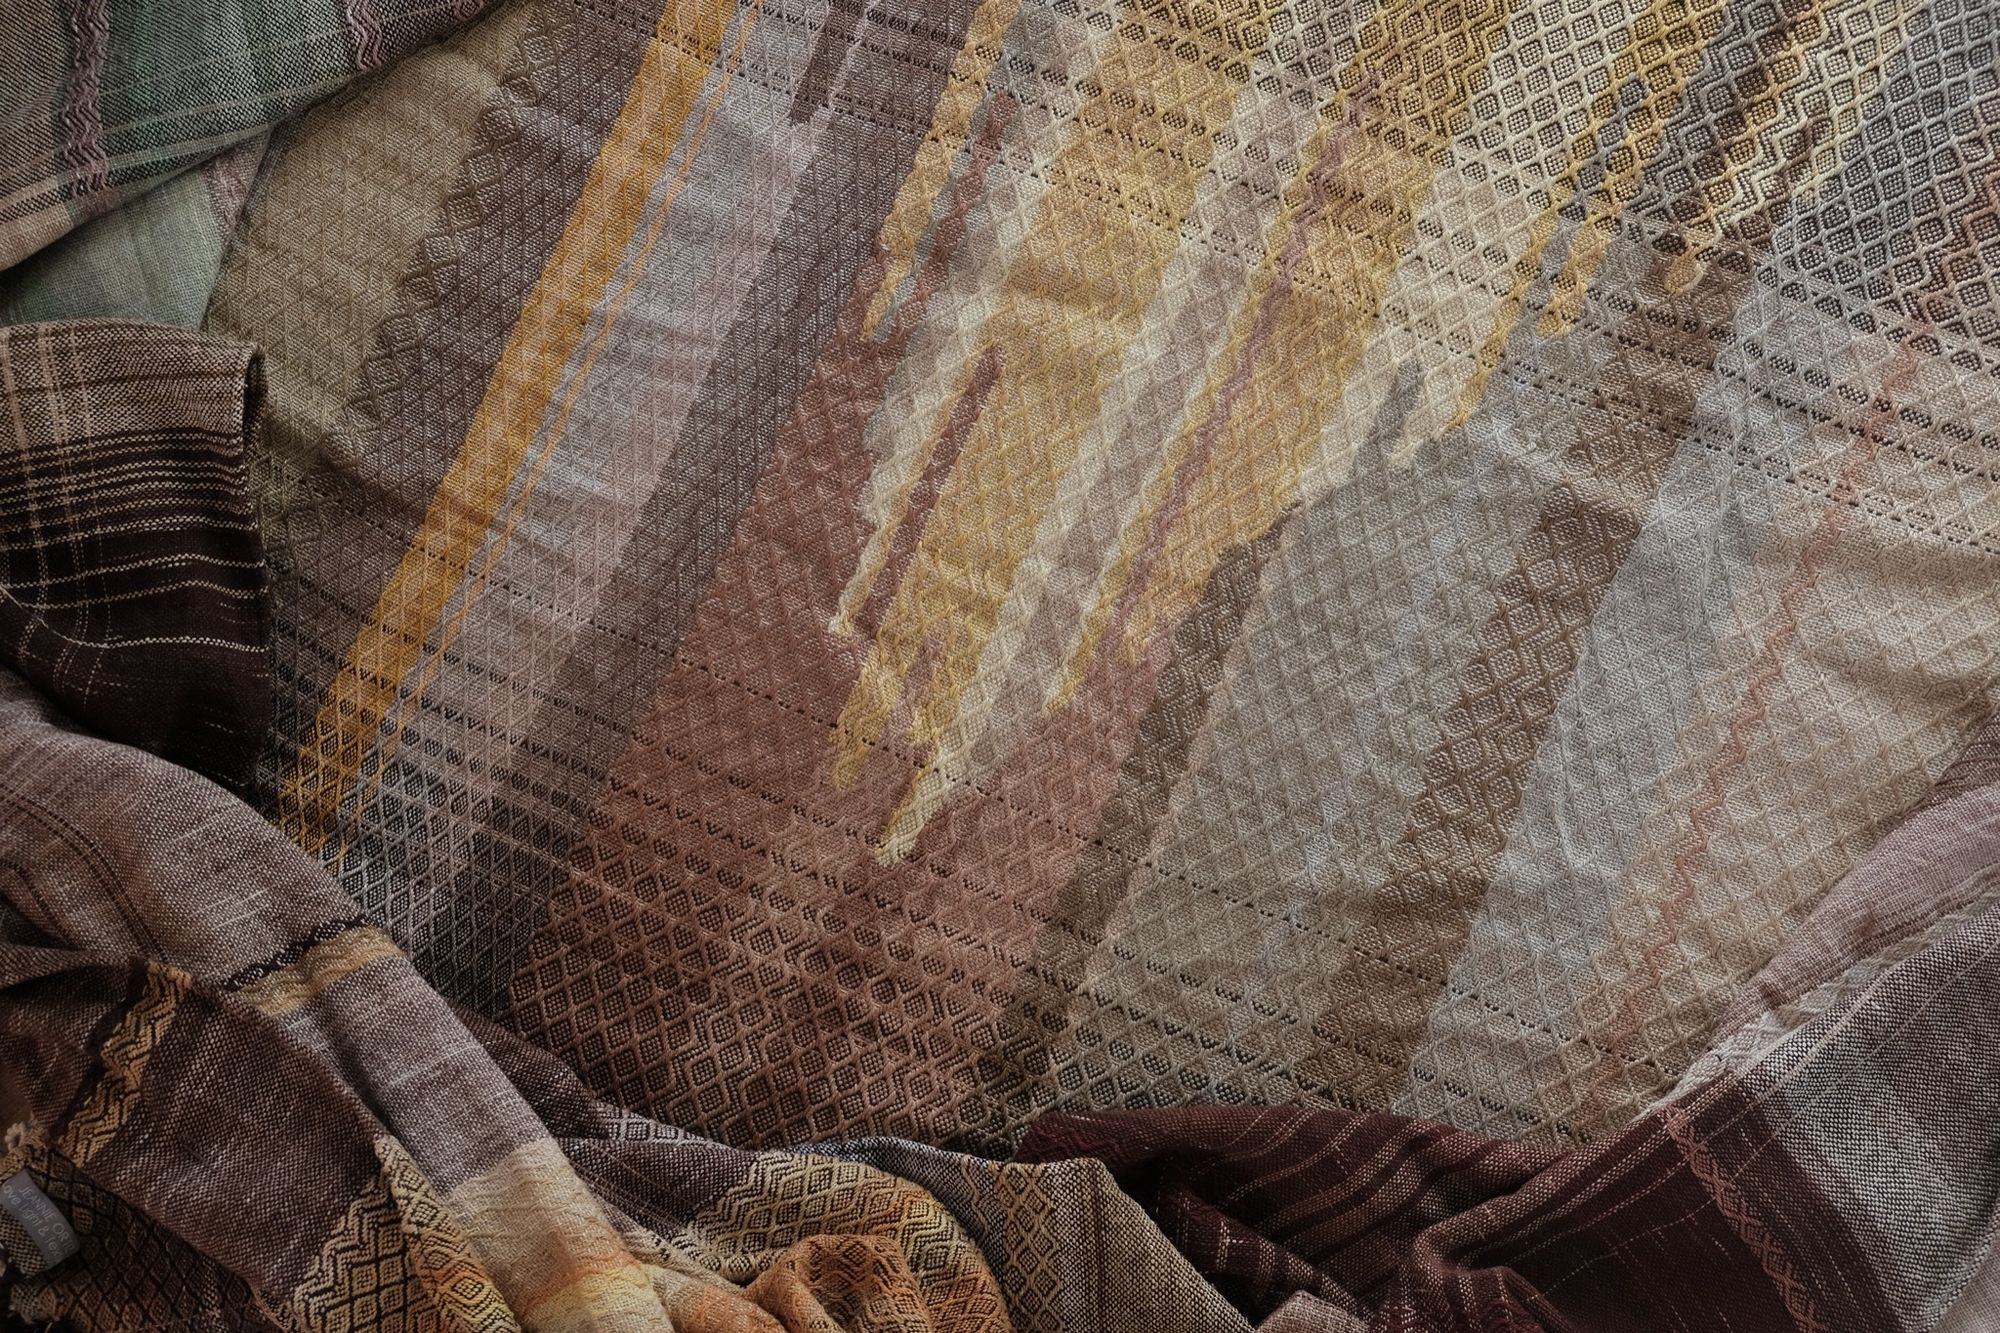 detail of soft yellow, green, orange and brown Handwoven fabric laying on a wood floor